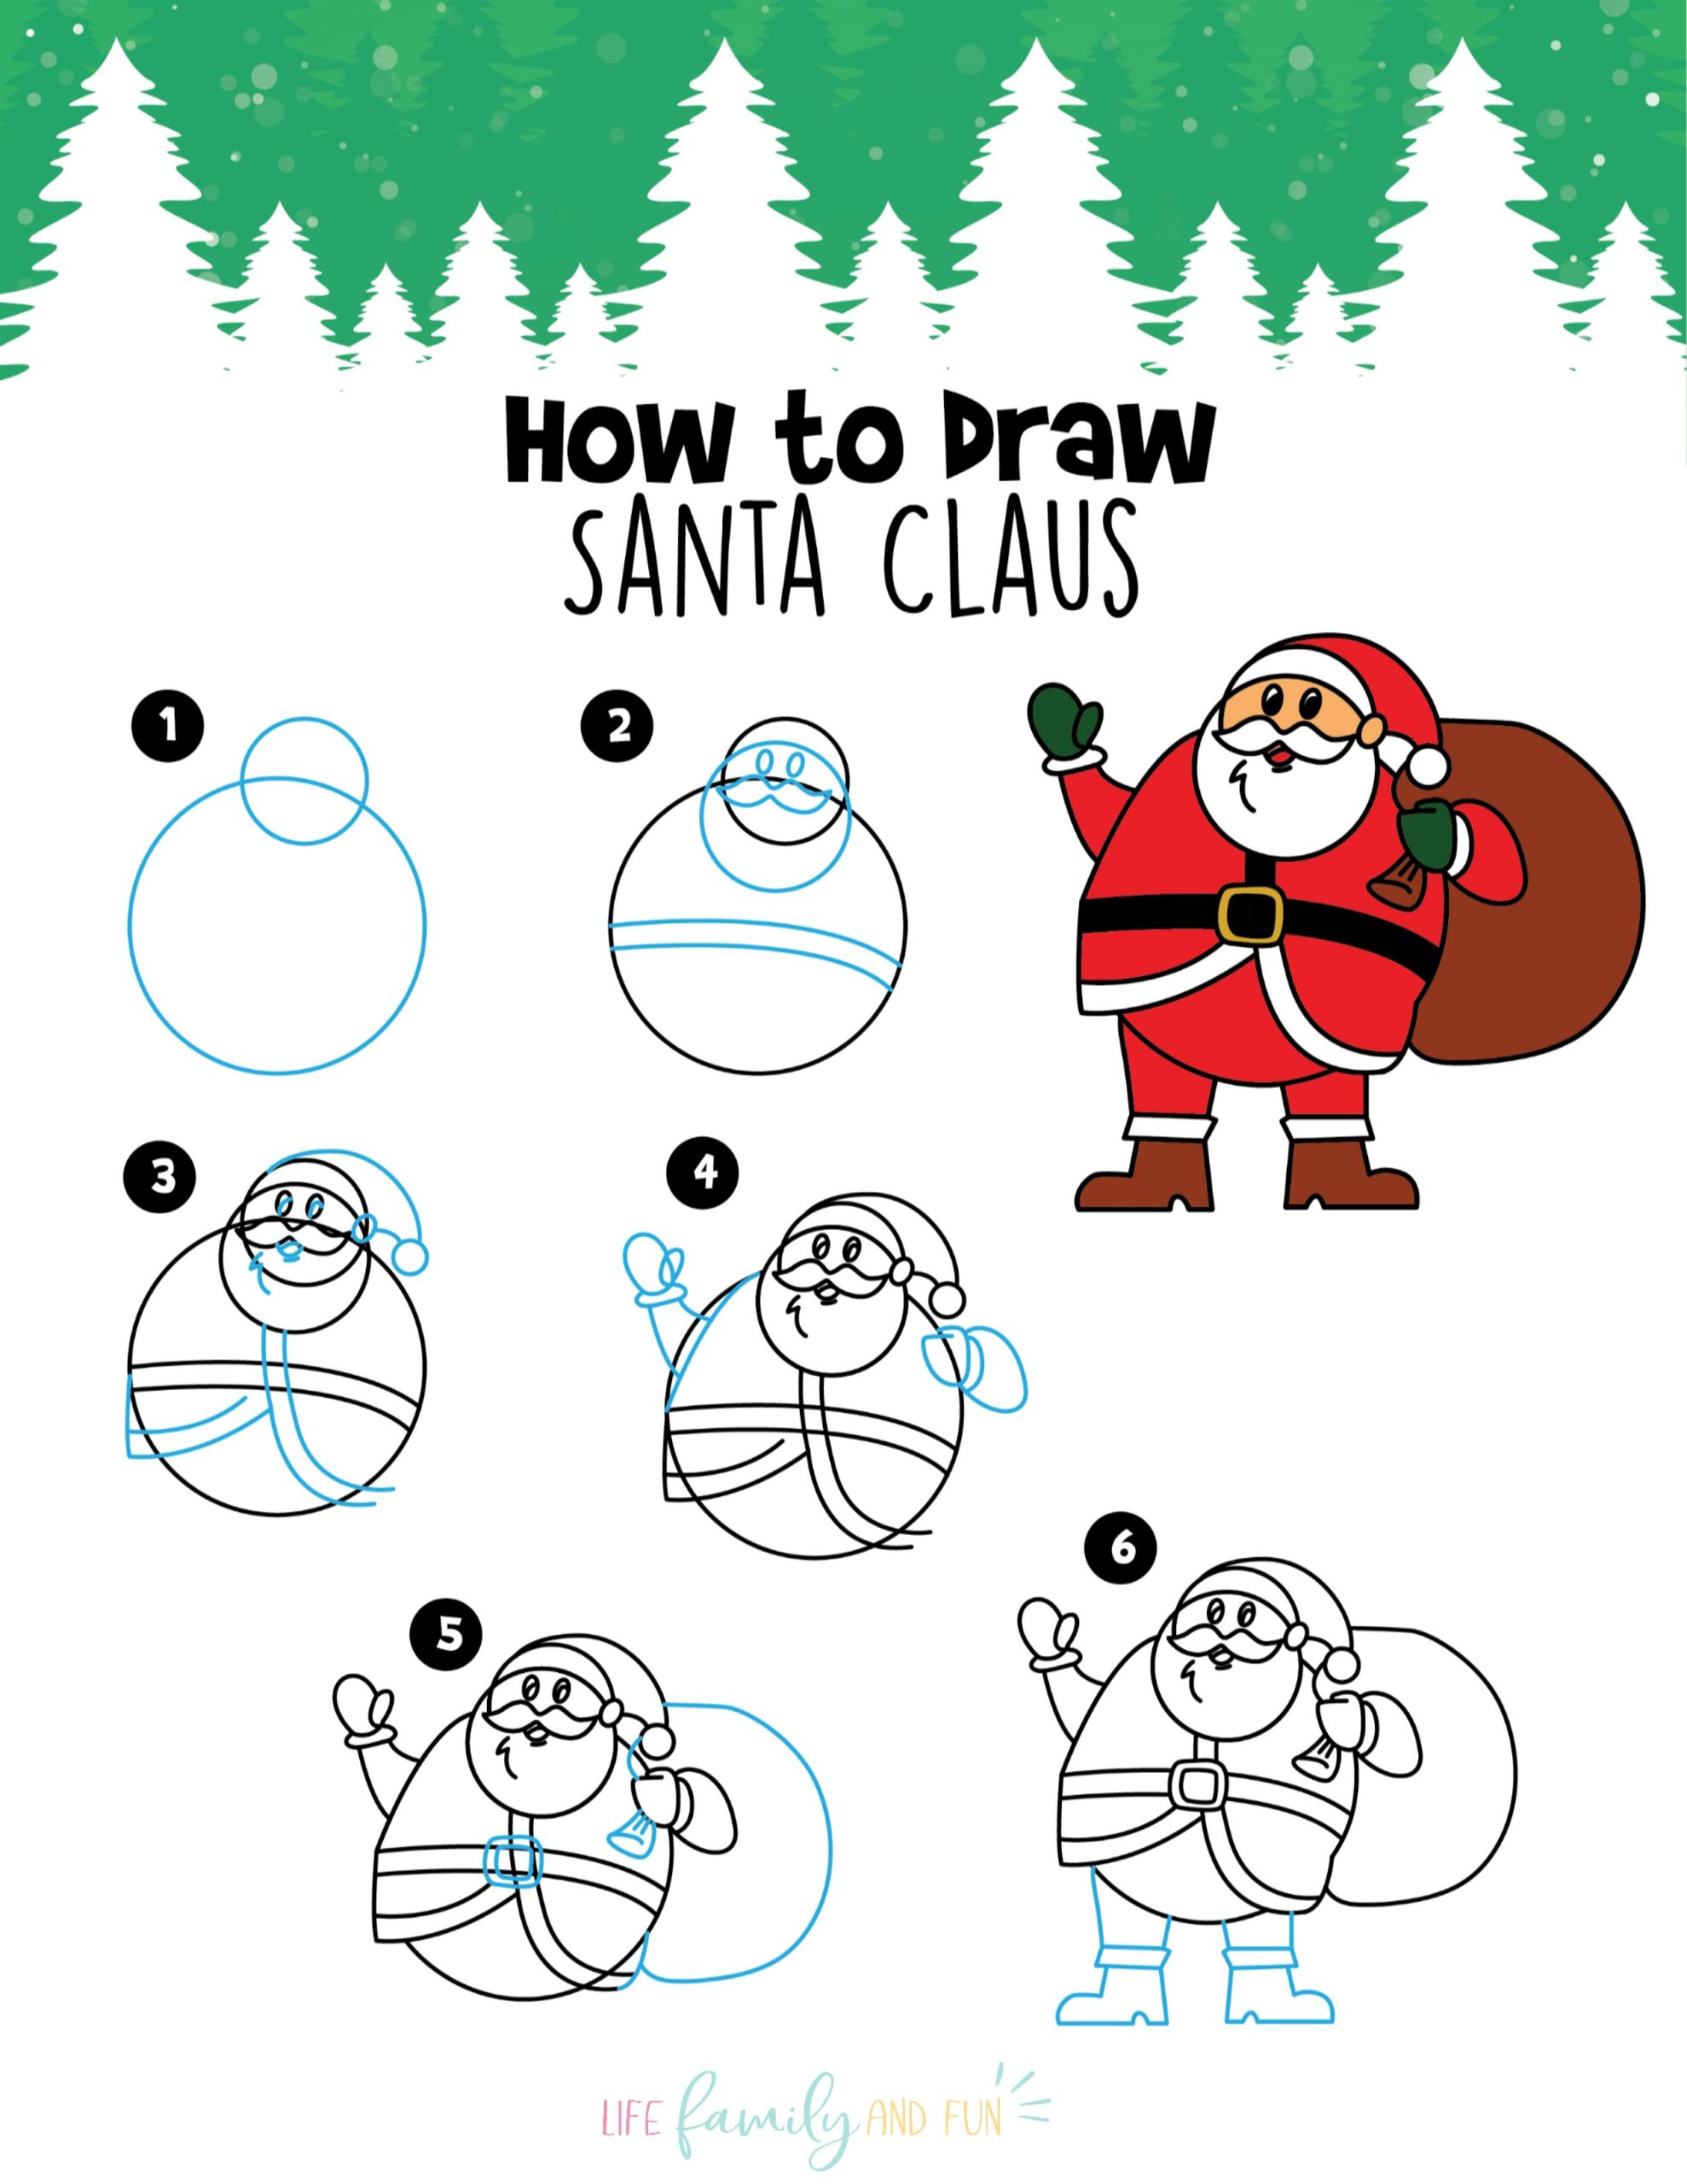 How to draw Santa Claus - Step By Step